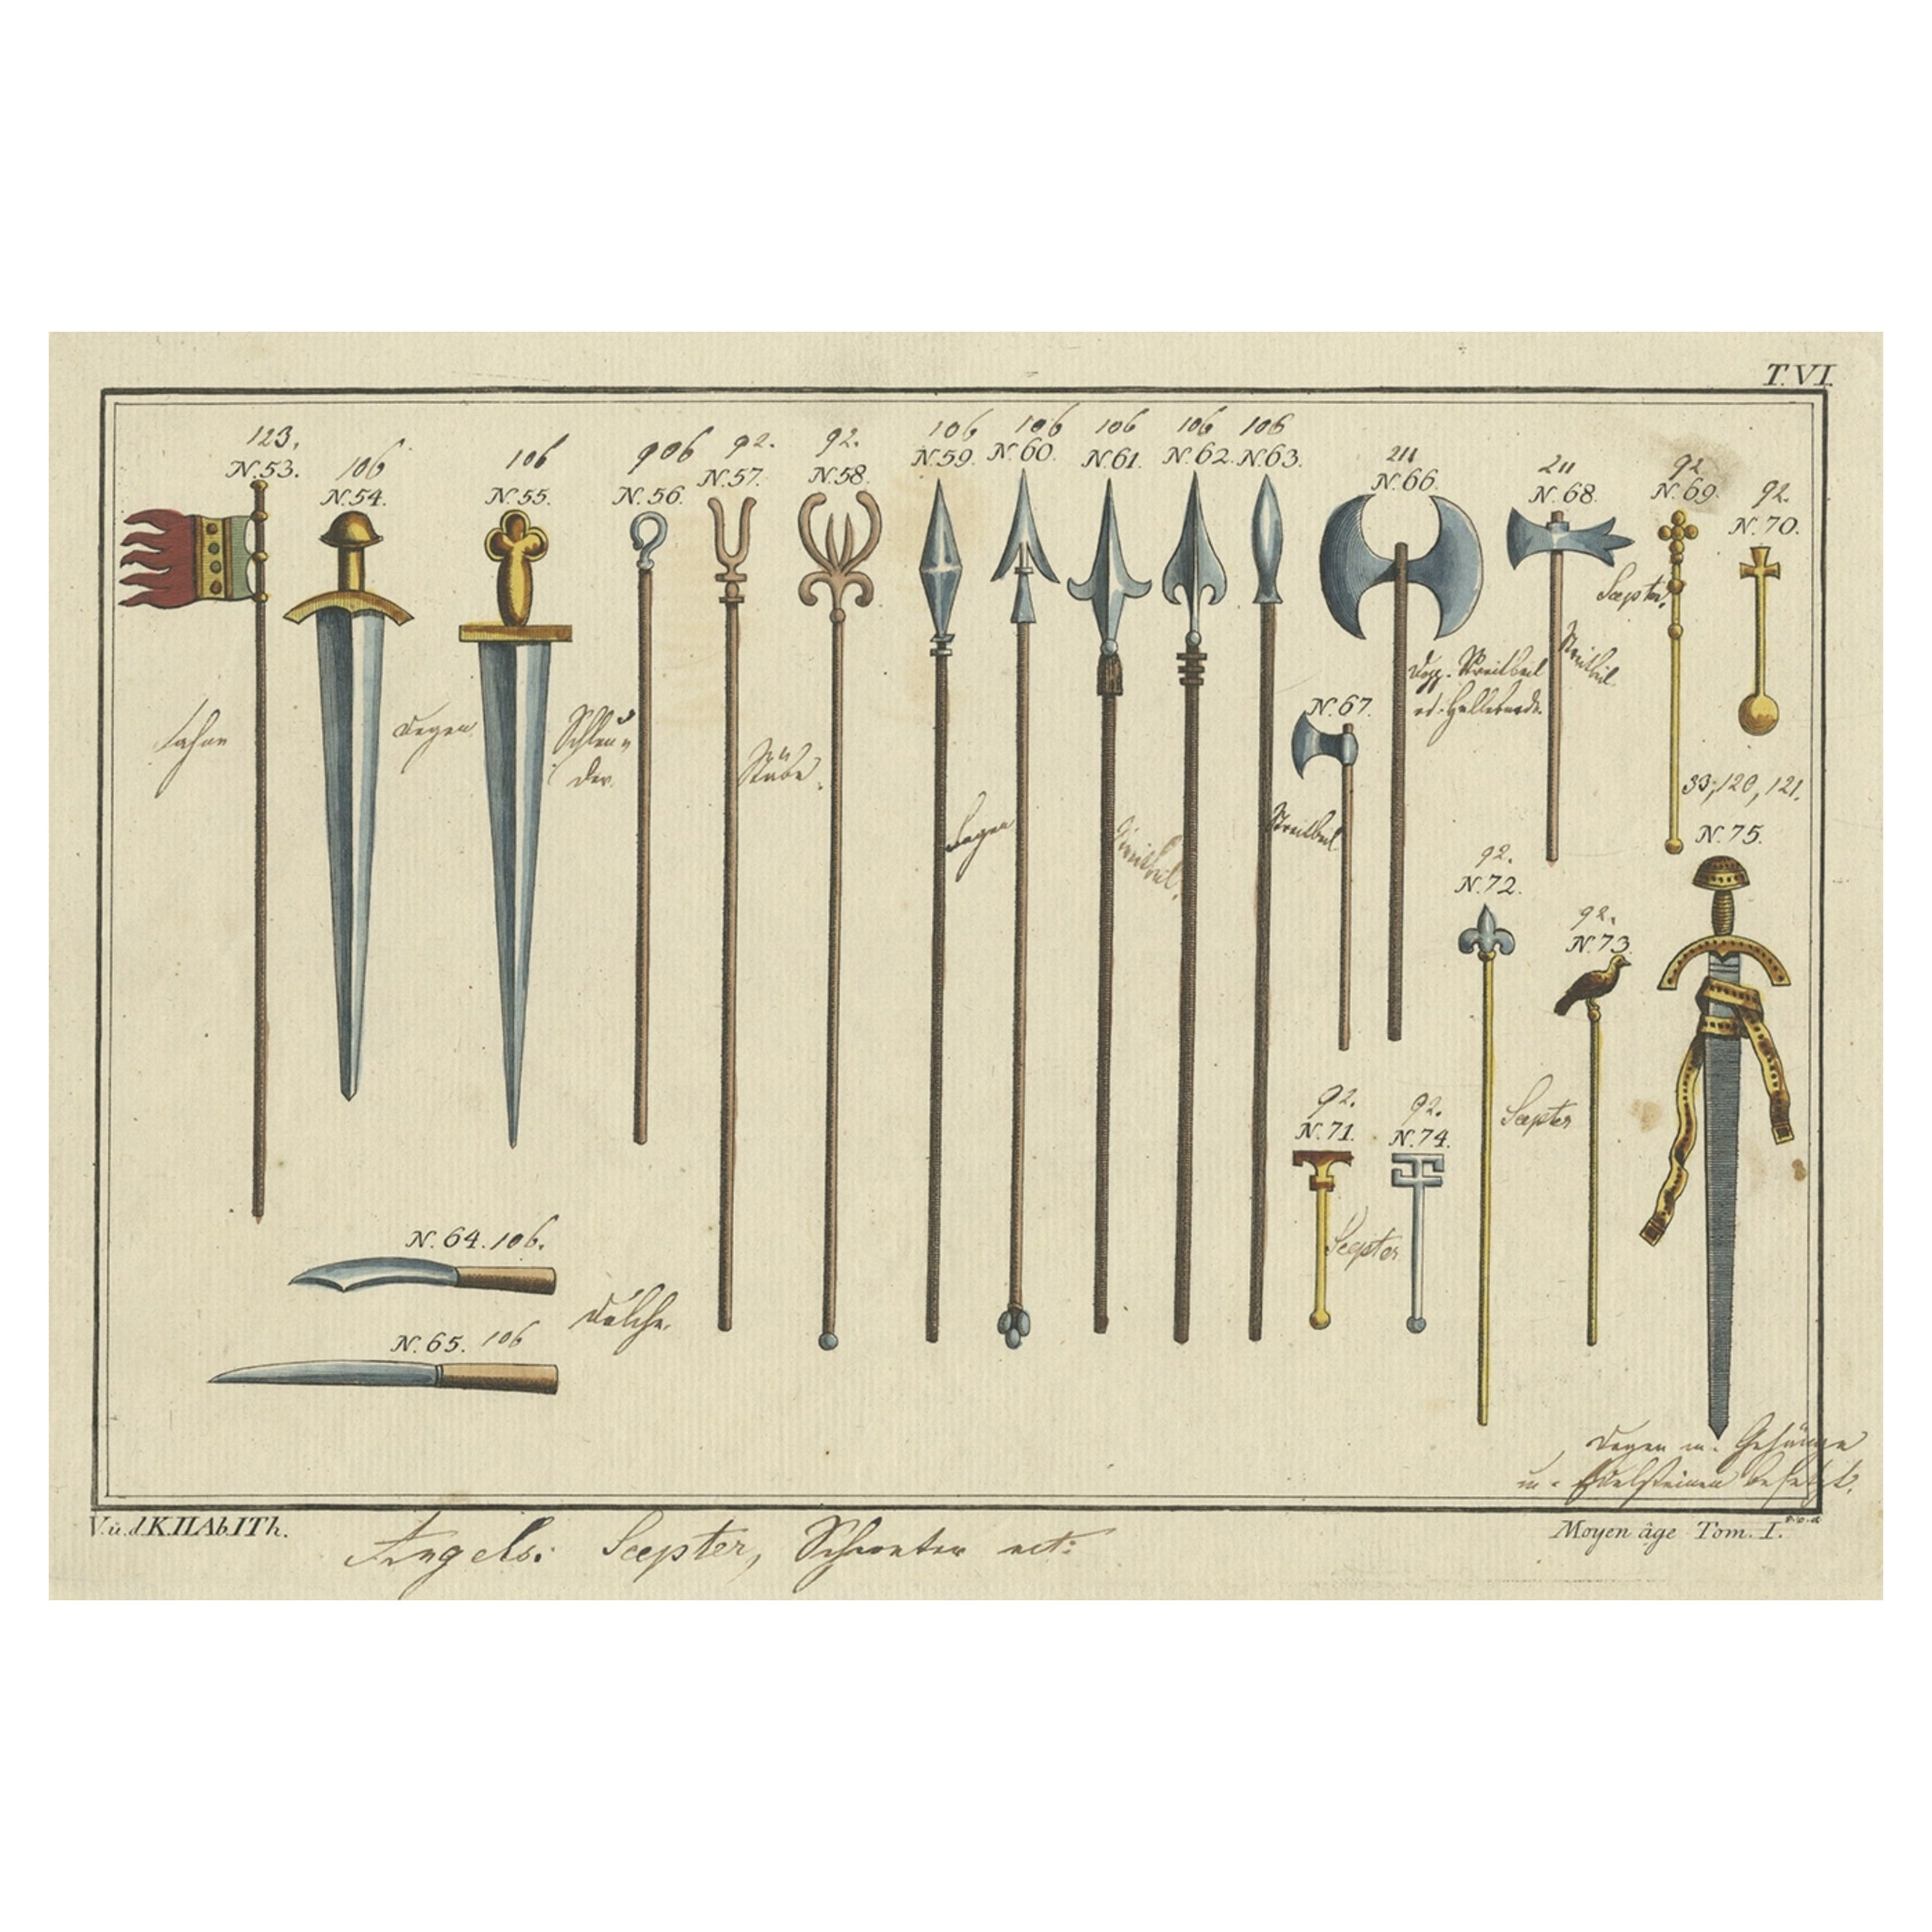 Old Print of Daggers, Axes, Spears, Lances, Swords Used in the Middle Ages, 1810